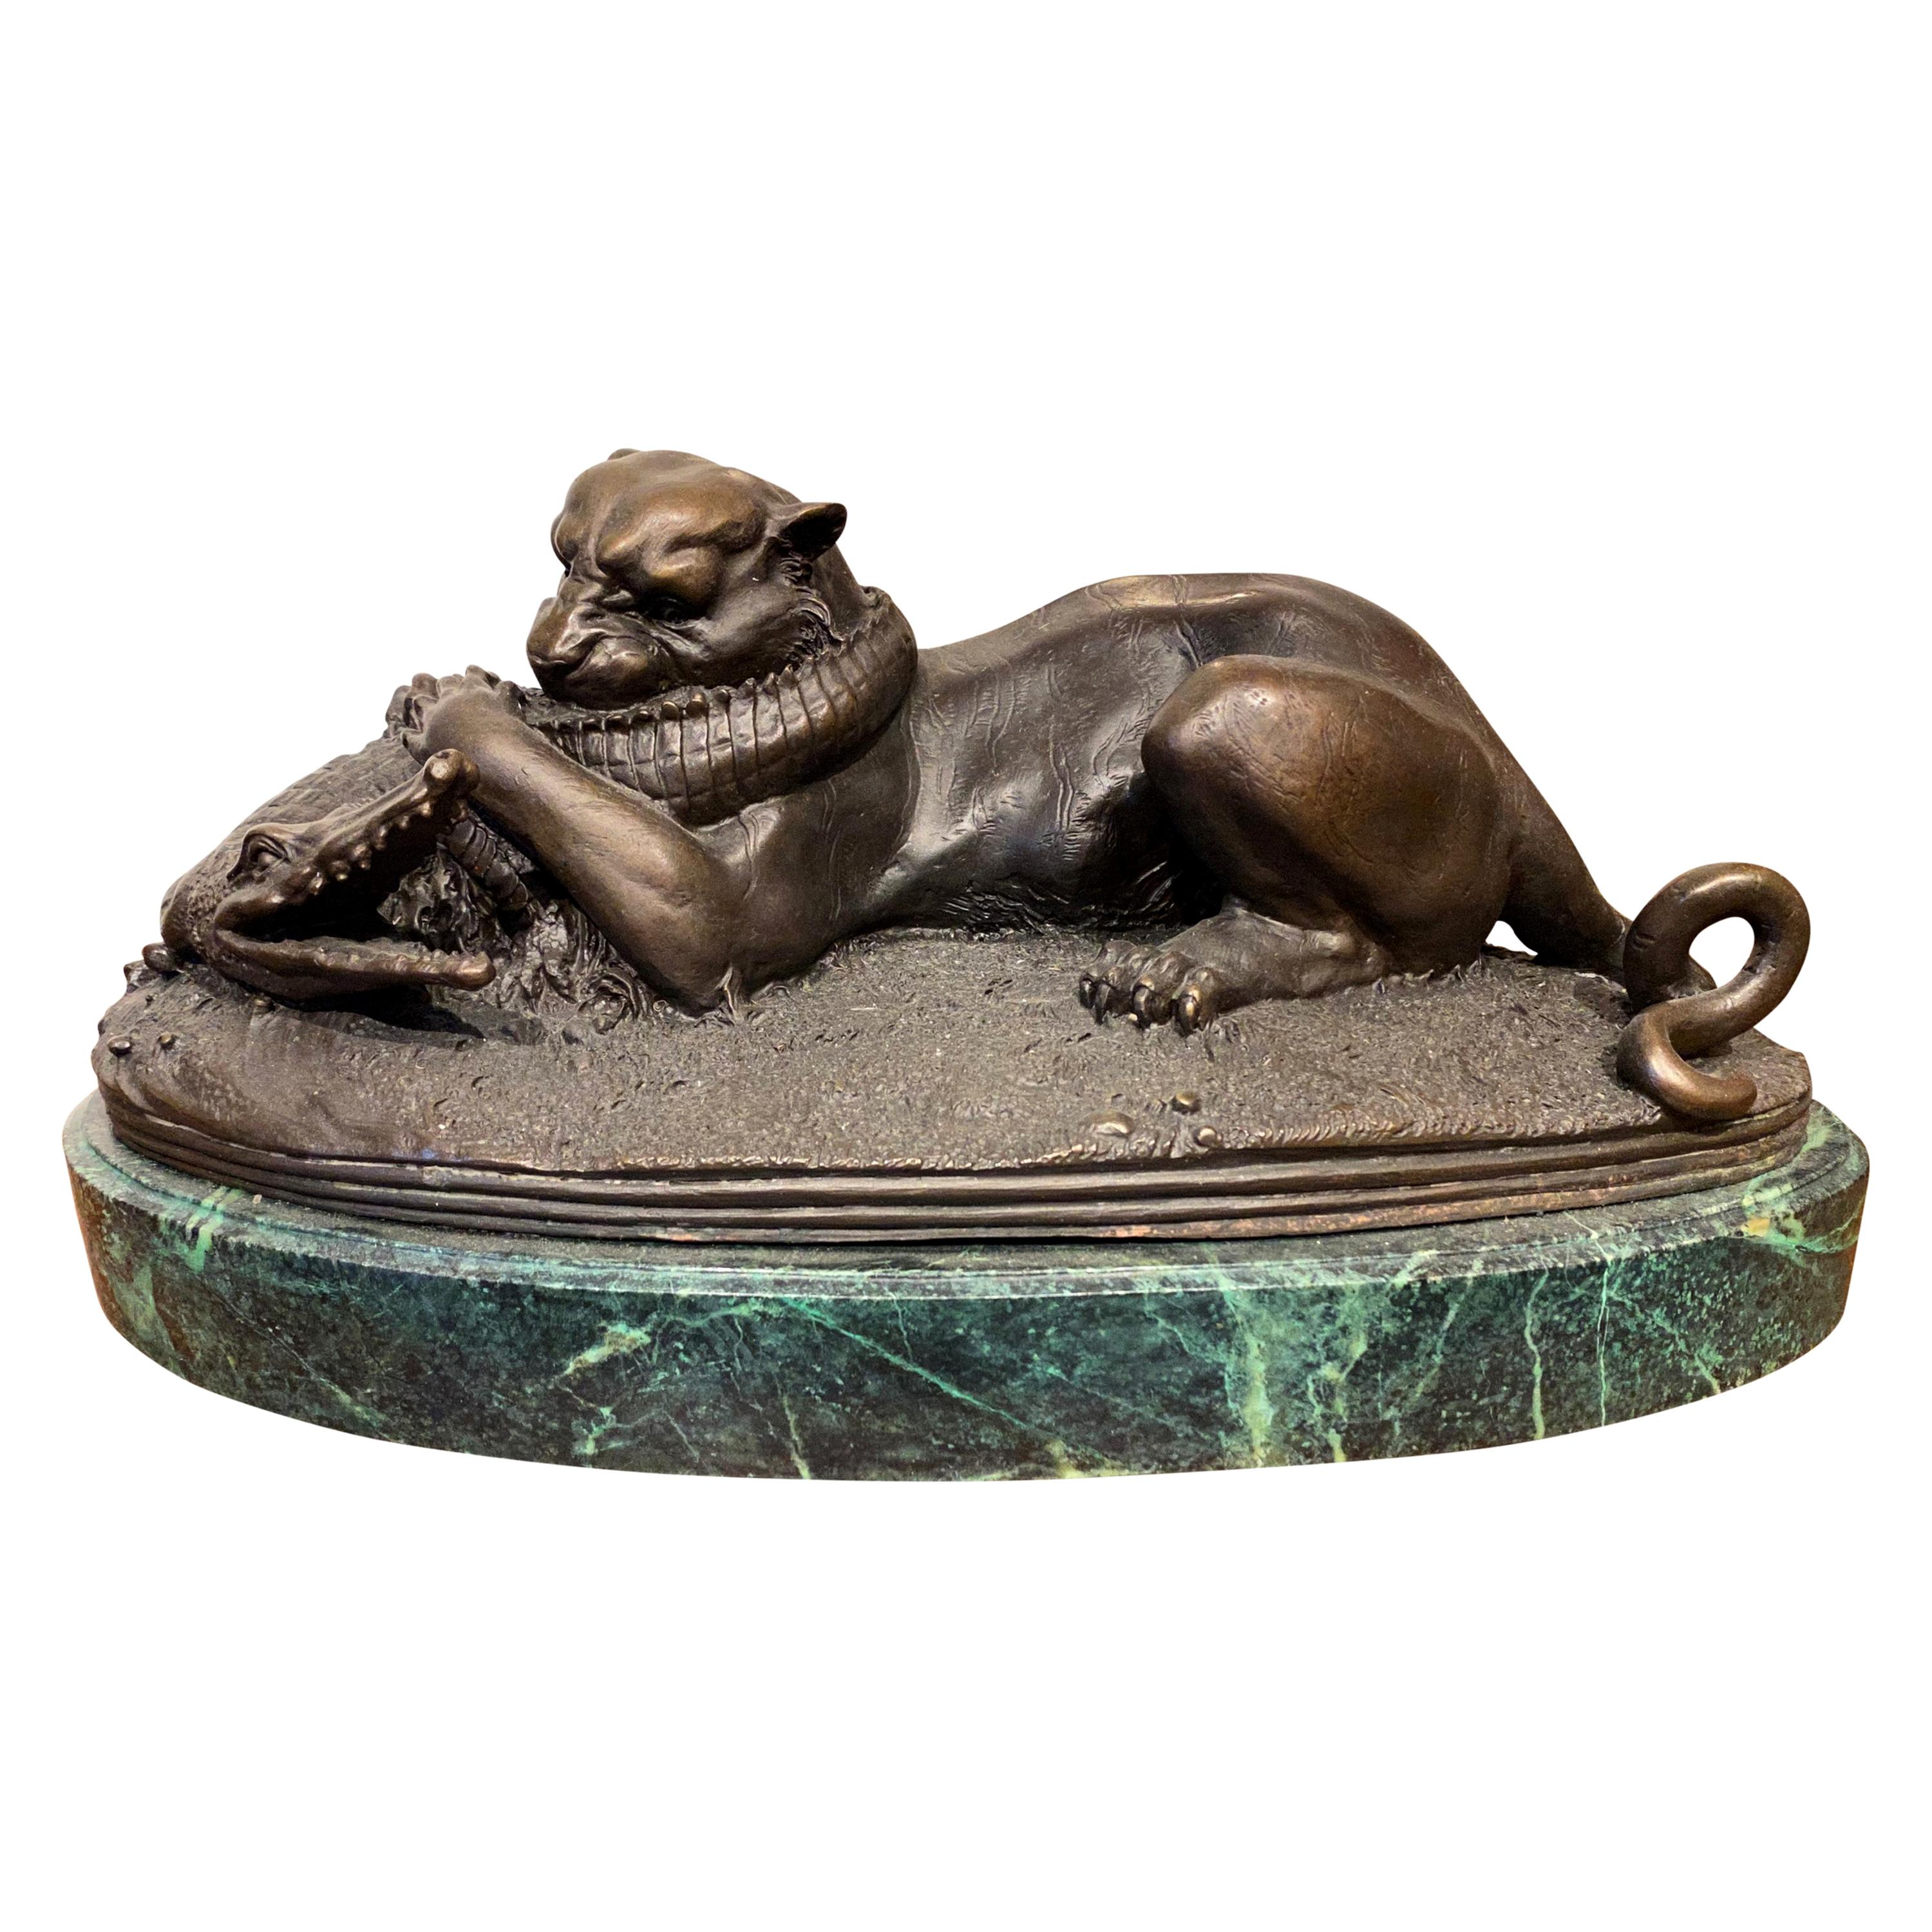 Bronze Sculpture of Panther For Fight, at panther | 20th 1stDibs Crocodile crocodile and Century Sale